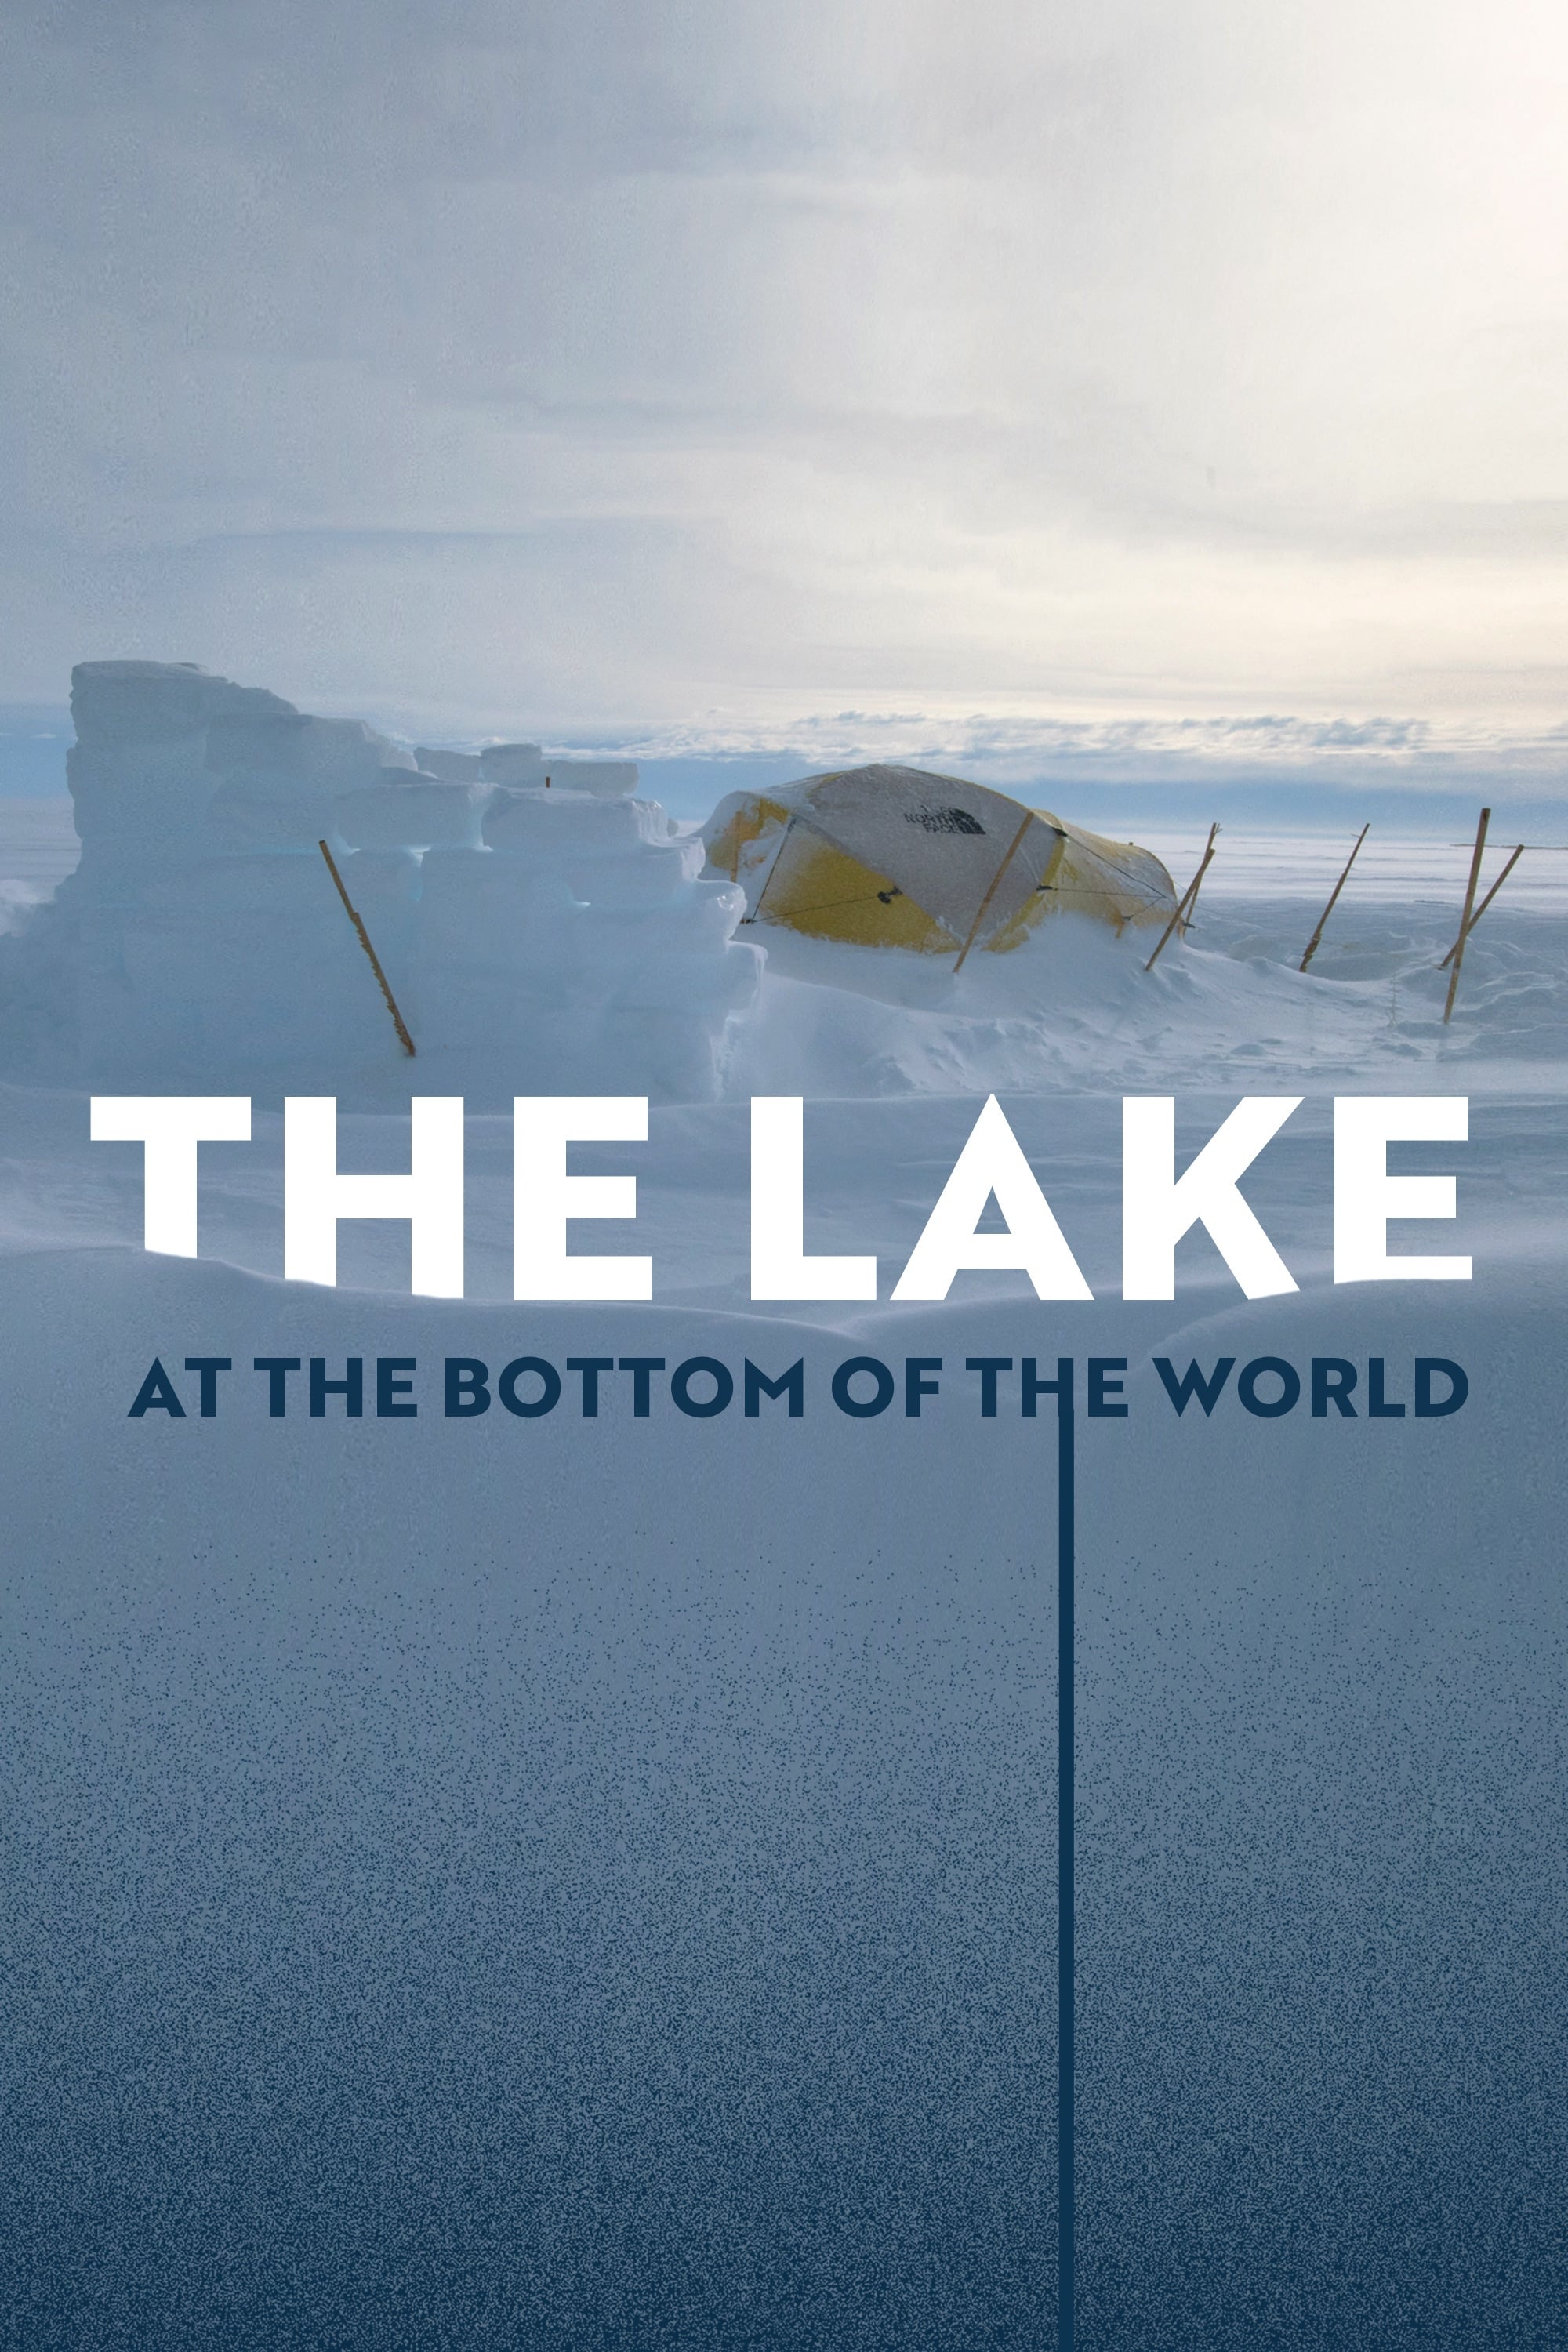 The Lake at the Bottom of the World